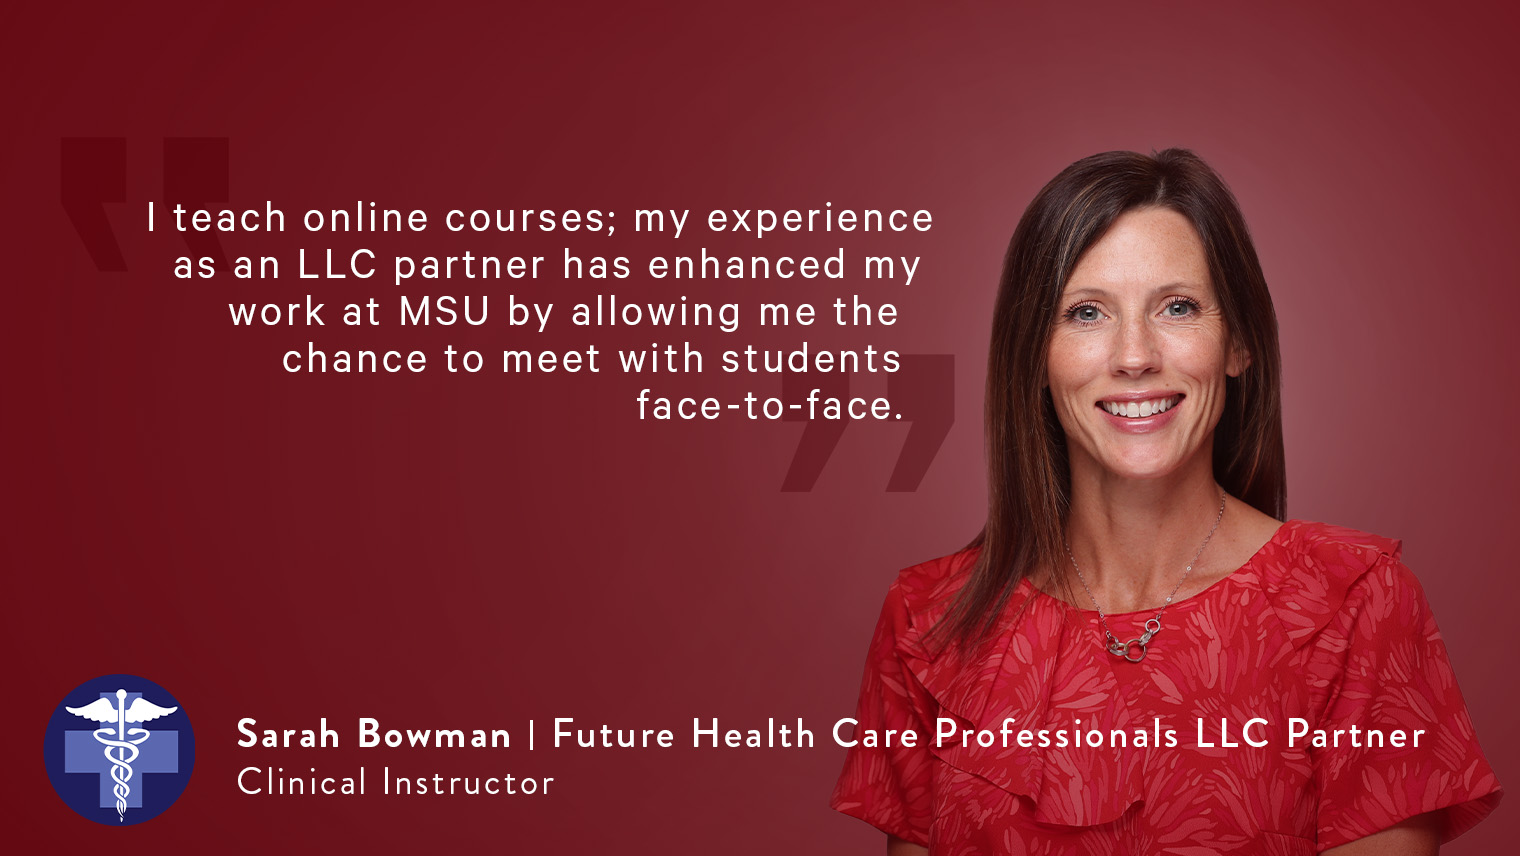 Quote from Sarah Bowman - Future Health Care Professionals LLC Partner